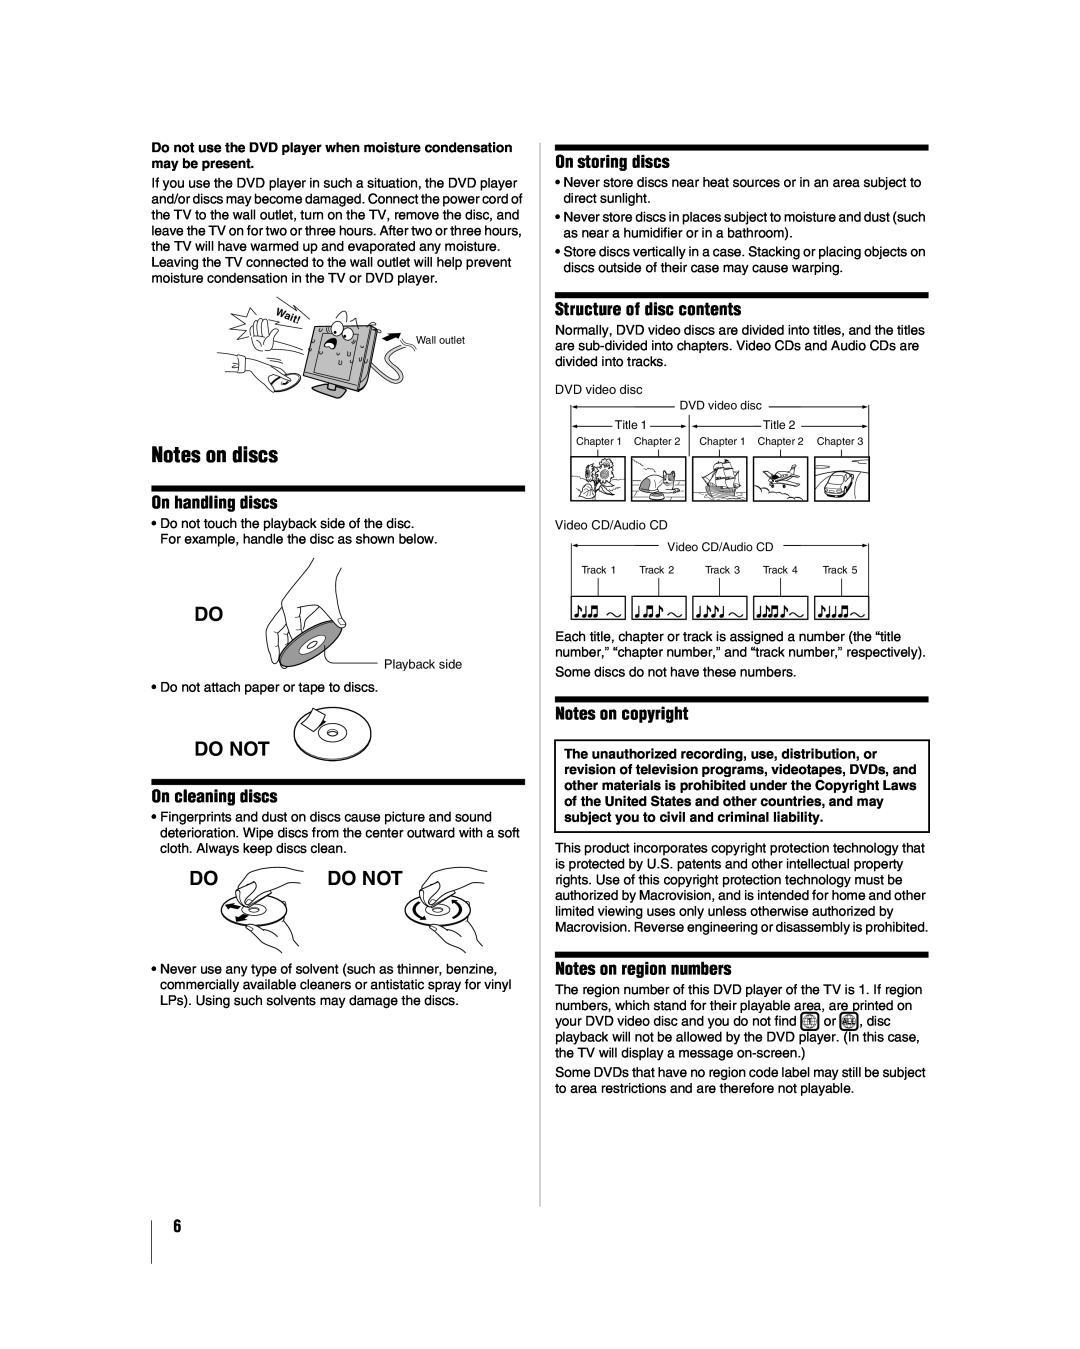 Toshiba 32LV37 Notes on discs, On handling discs, On cleaning discs, On storing discs, Structure of disc contents, Do Not 